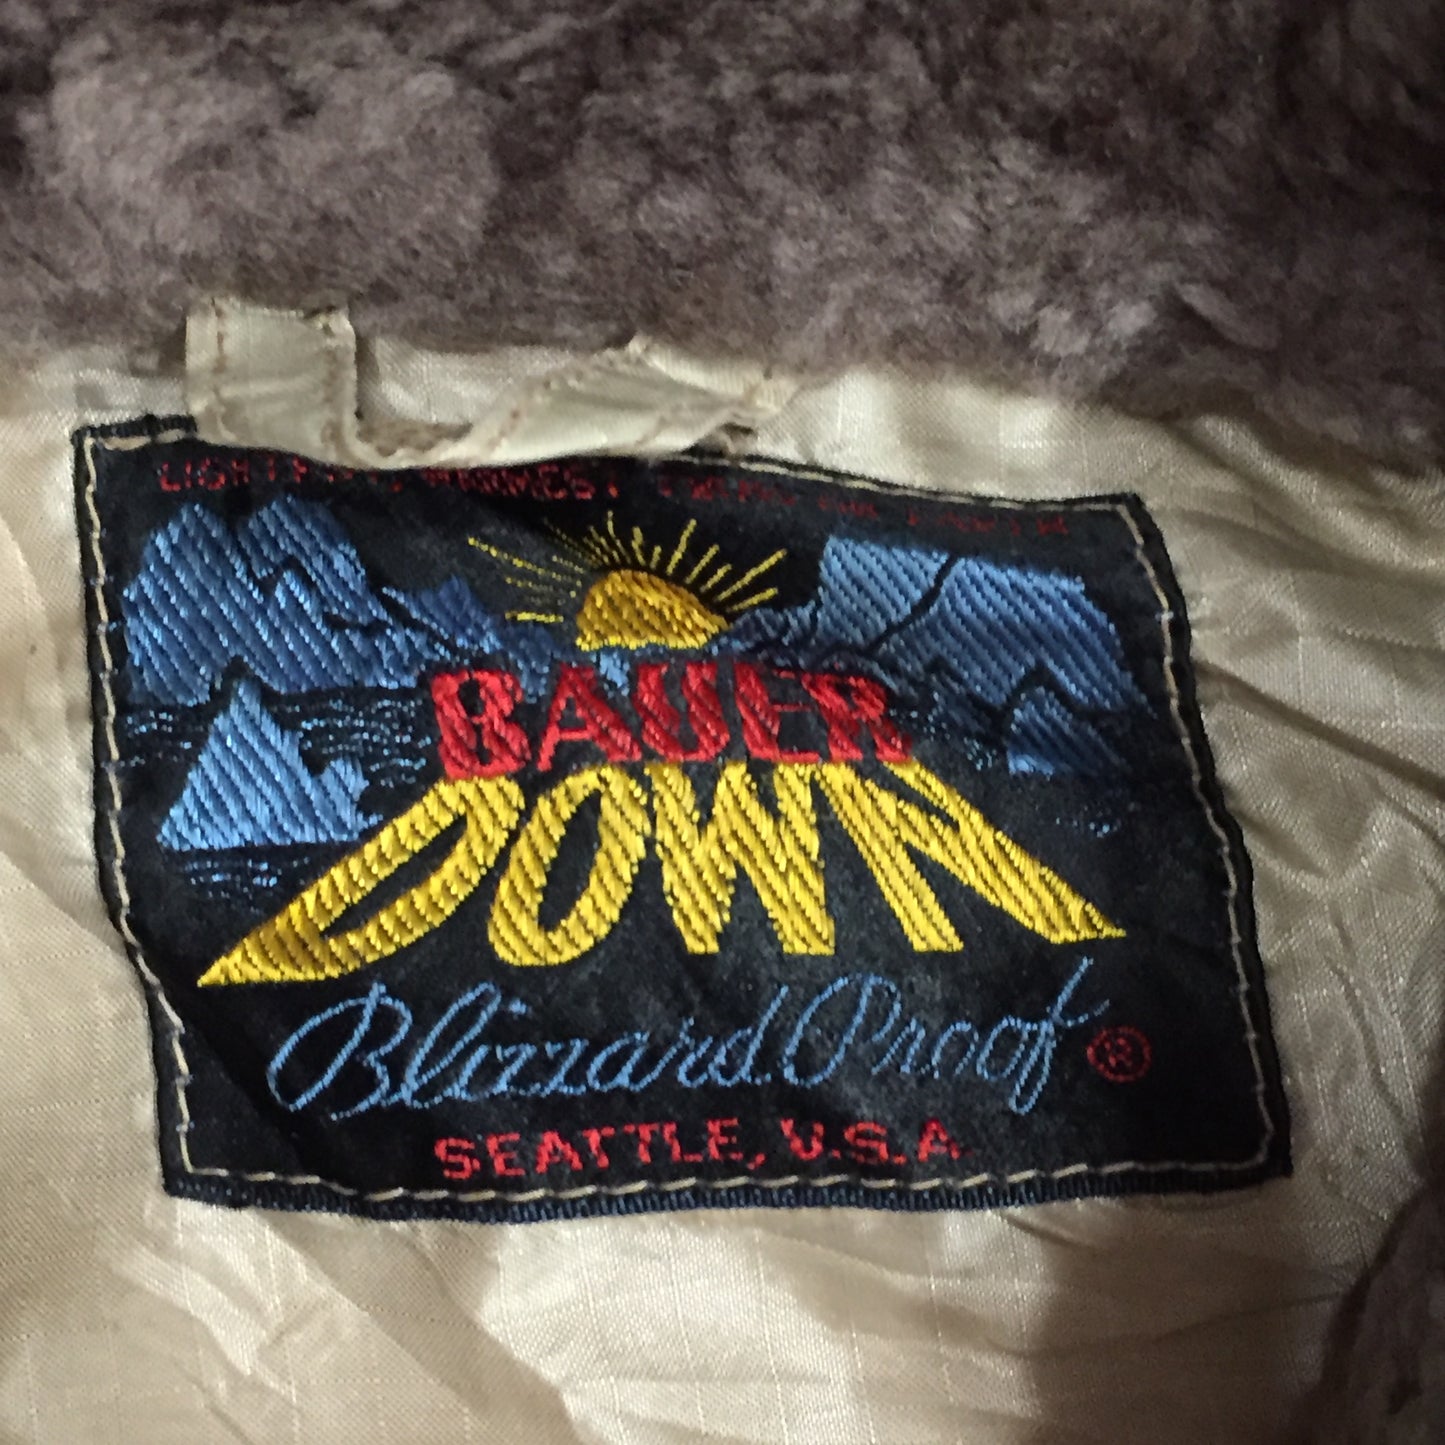 1950s Eddie Bauer quilted down jacket Blizzard Proof size small Sundowner label